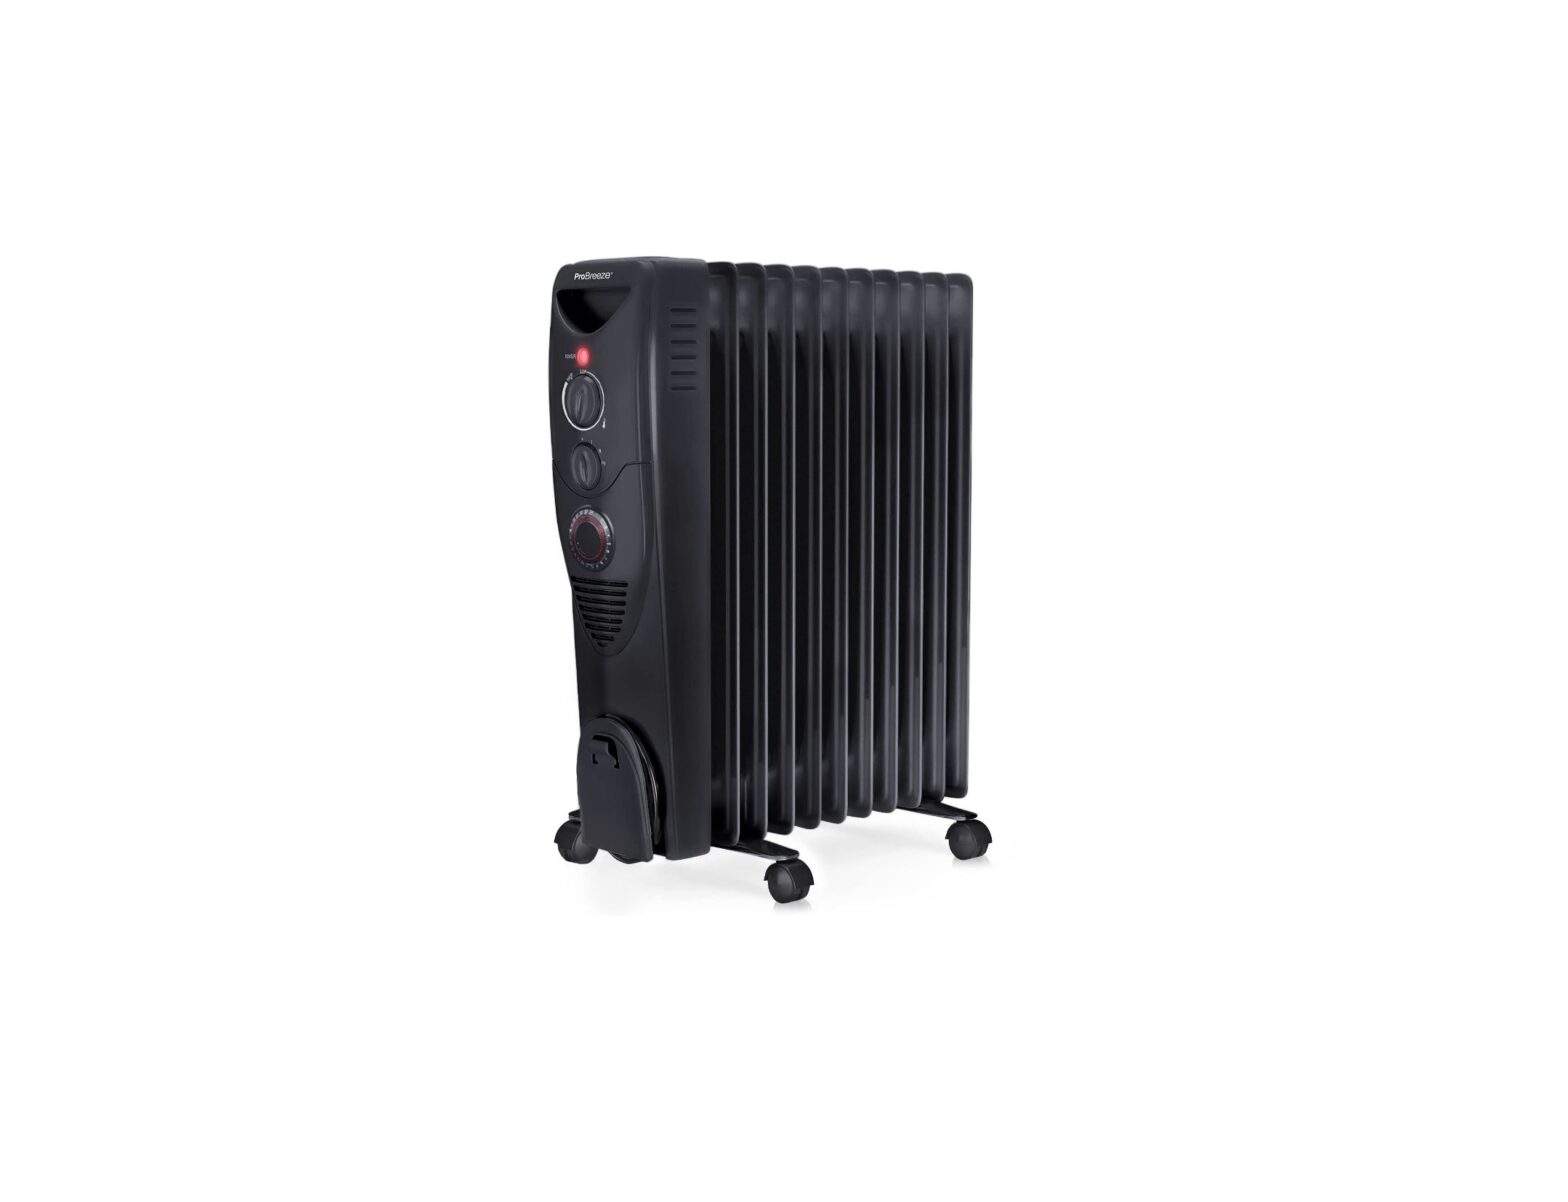 Pro Breeze PB-H-23W Oil Filled Radiator with 11 Fins User Manual